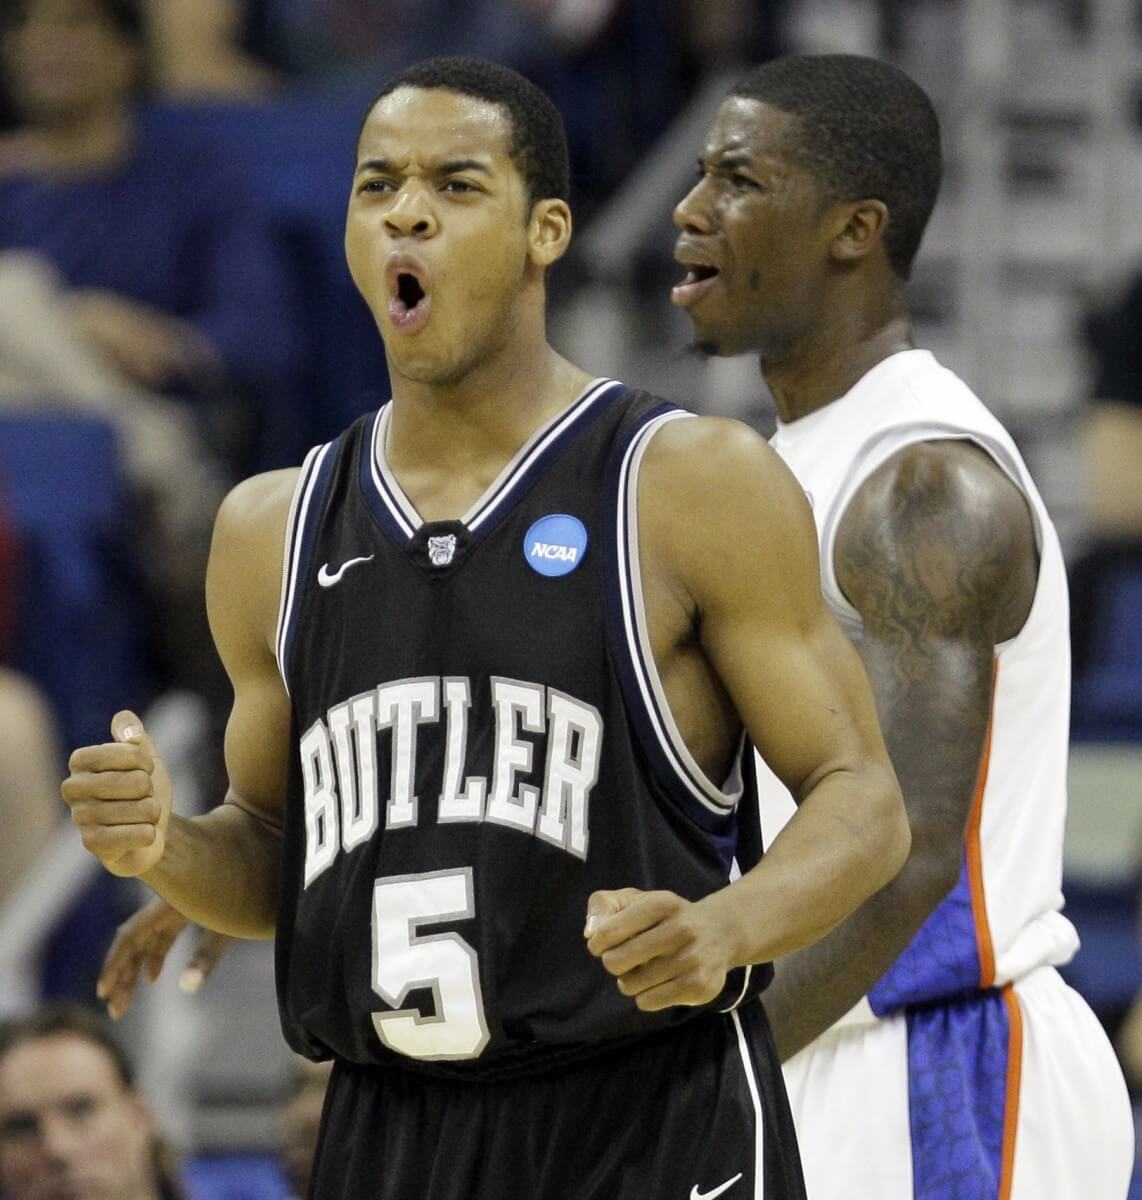 Nored as a player with Butler University in 2011. (AP)